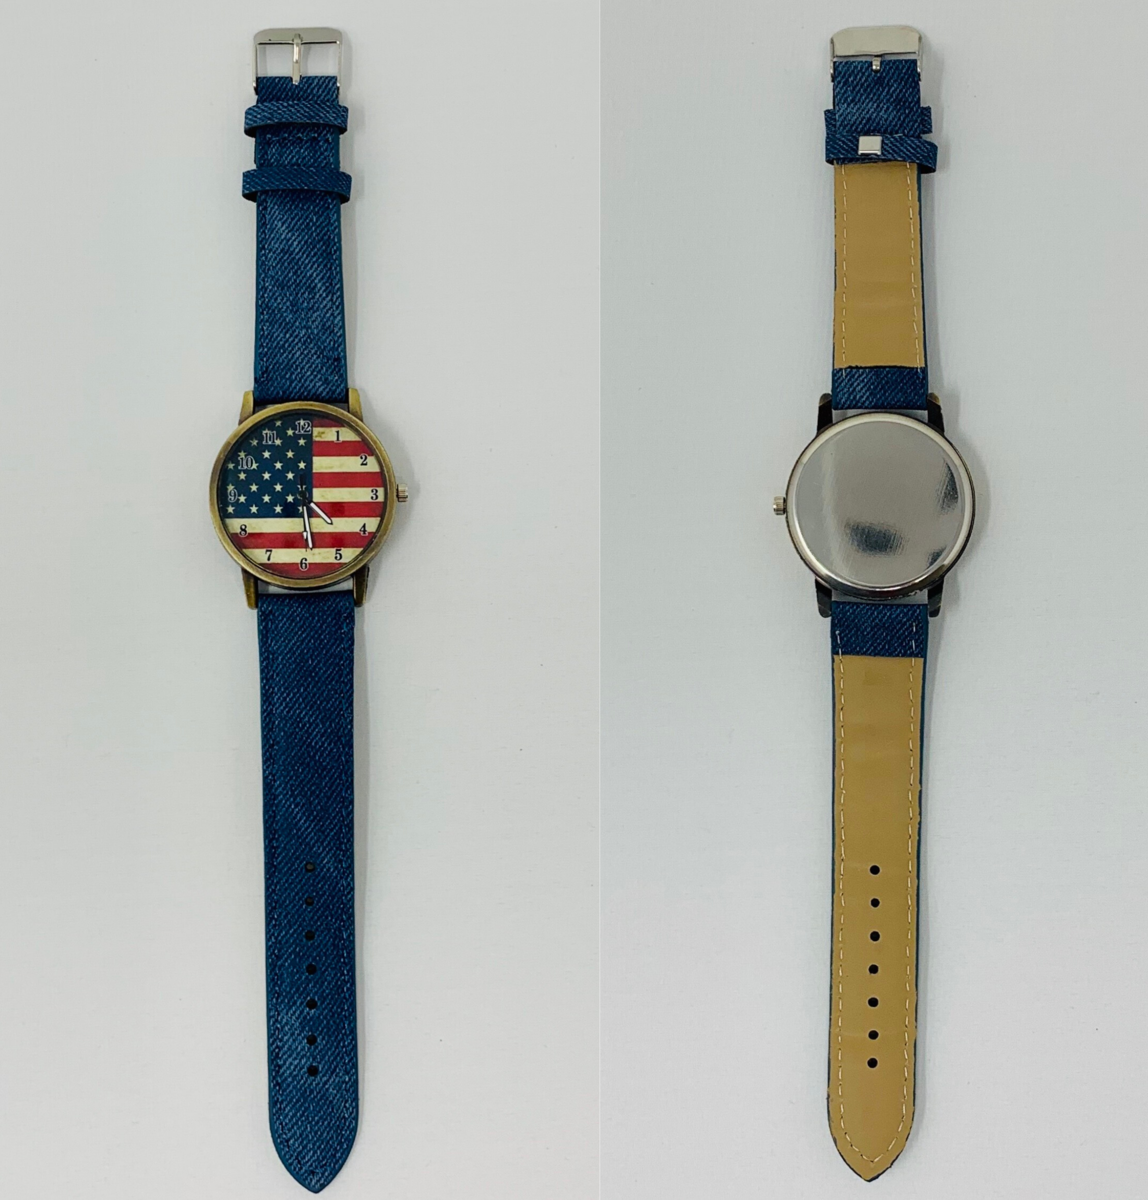 Patriotic American Watch with Blue Band  Patriot Powered ...